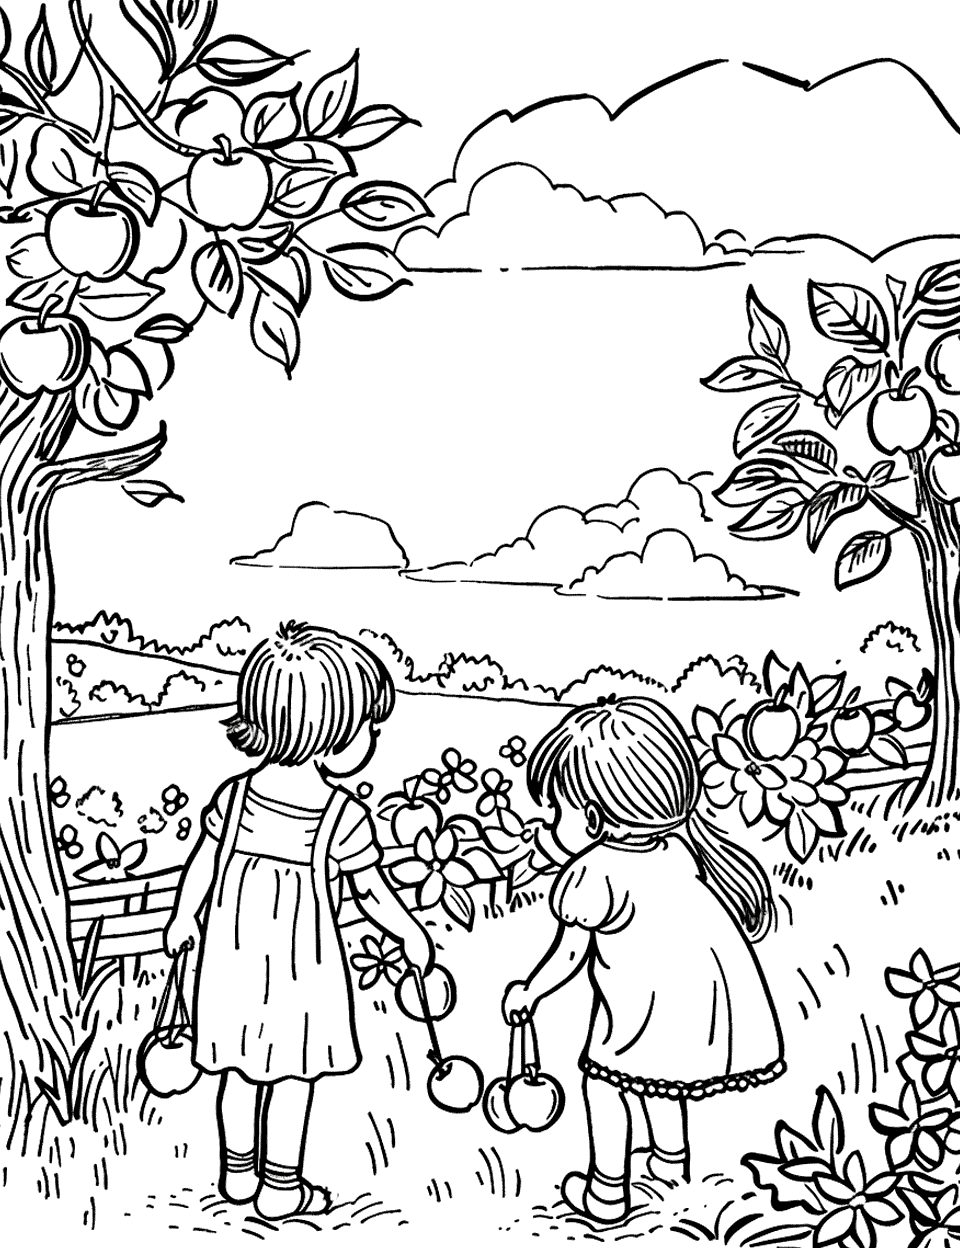 Picking Apples Garden Coloring Page - Children holding apples in an orchard in the countryside.